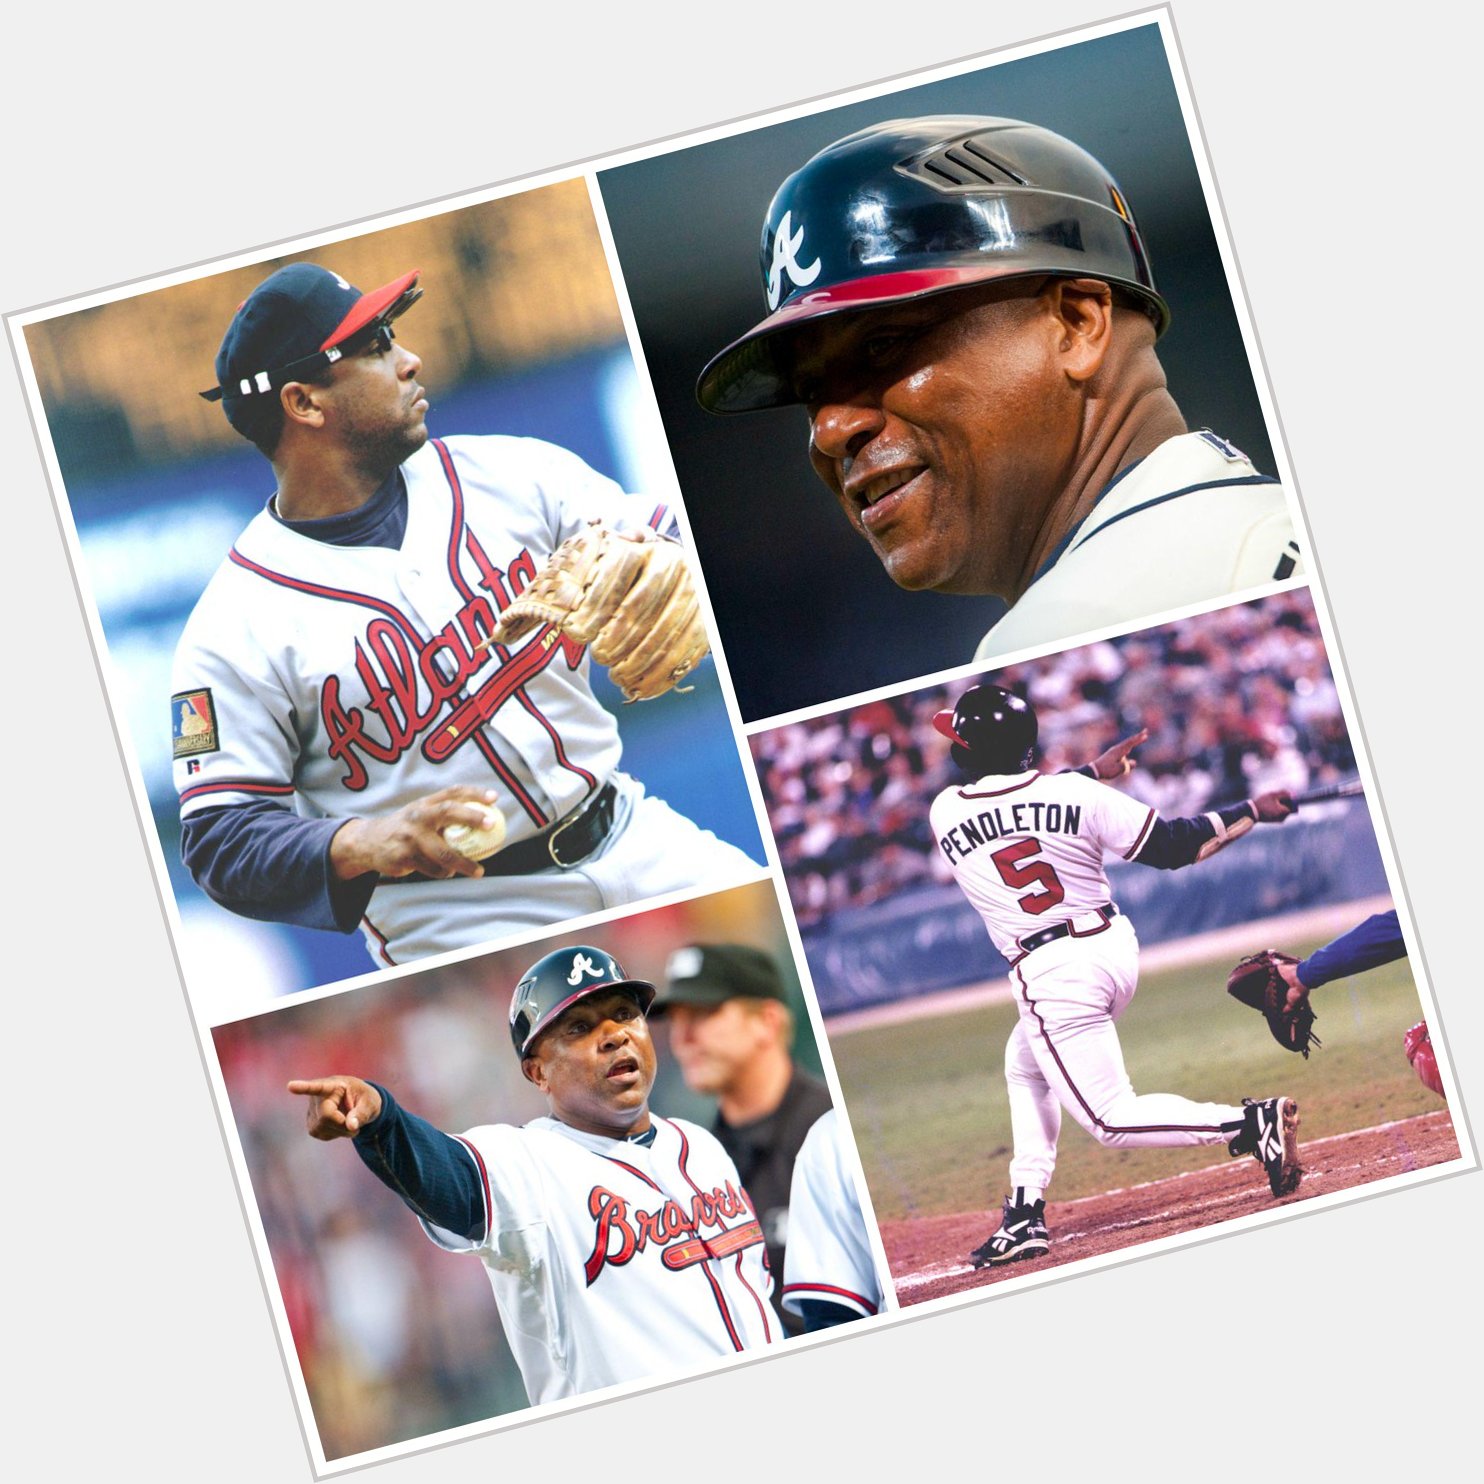 Happy Birthday to first base coach and 1991 NL MVP, Terry Pendleton! 